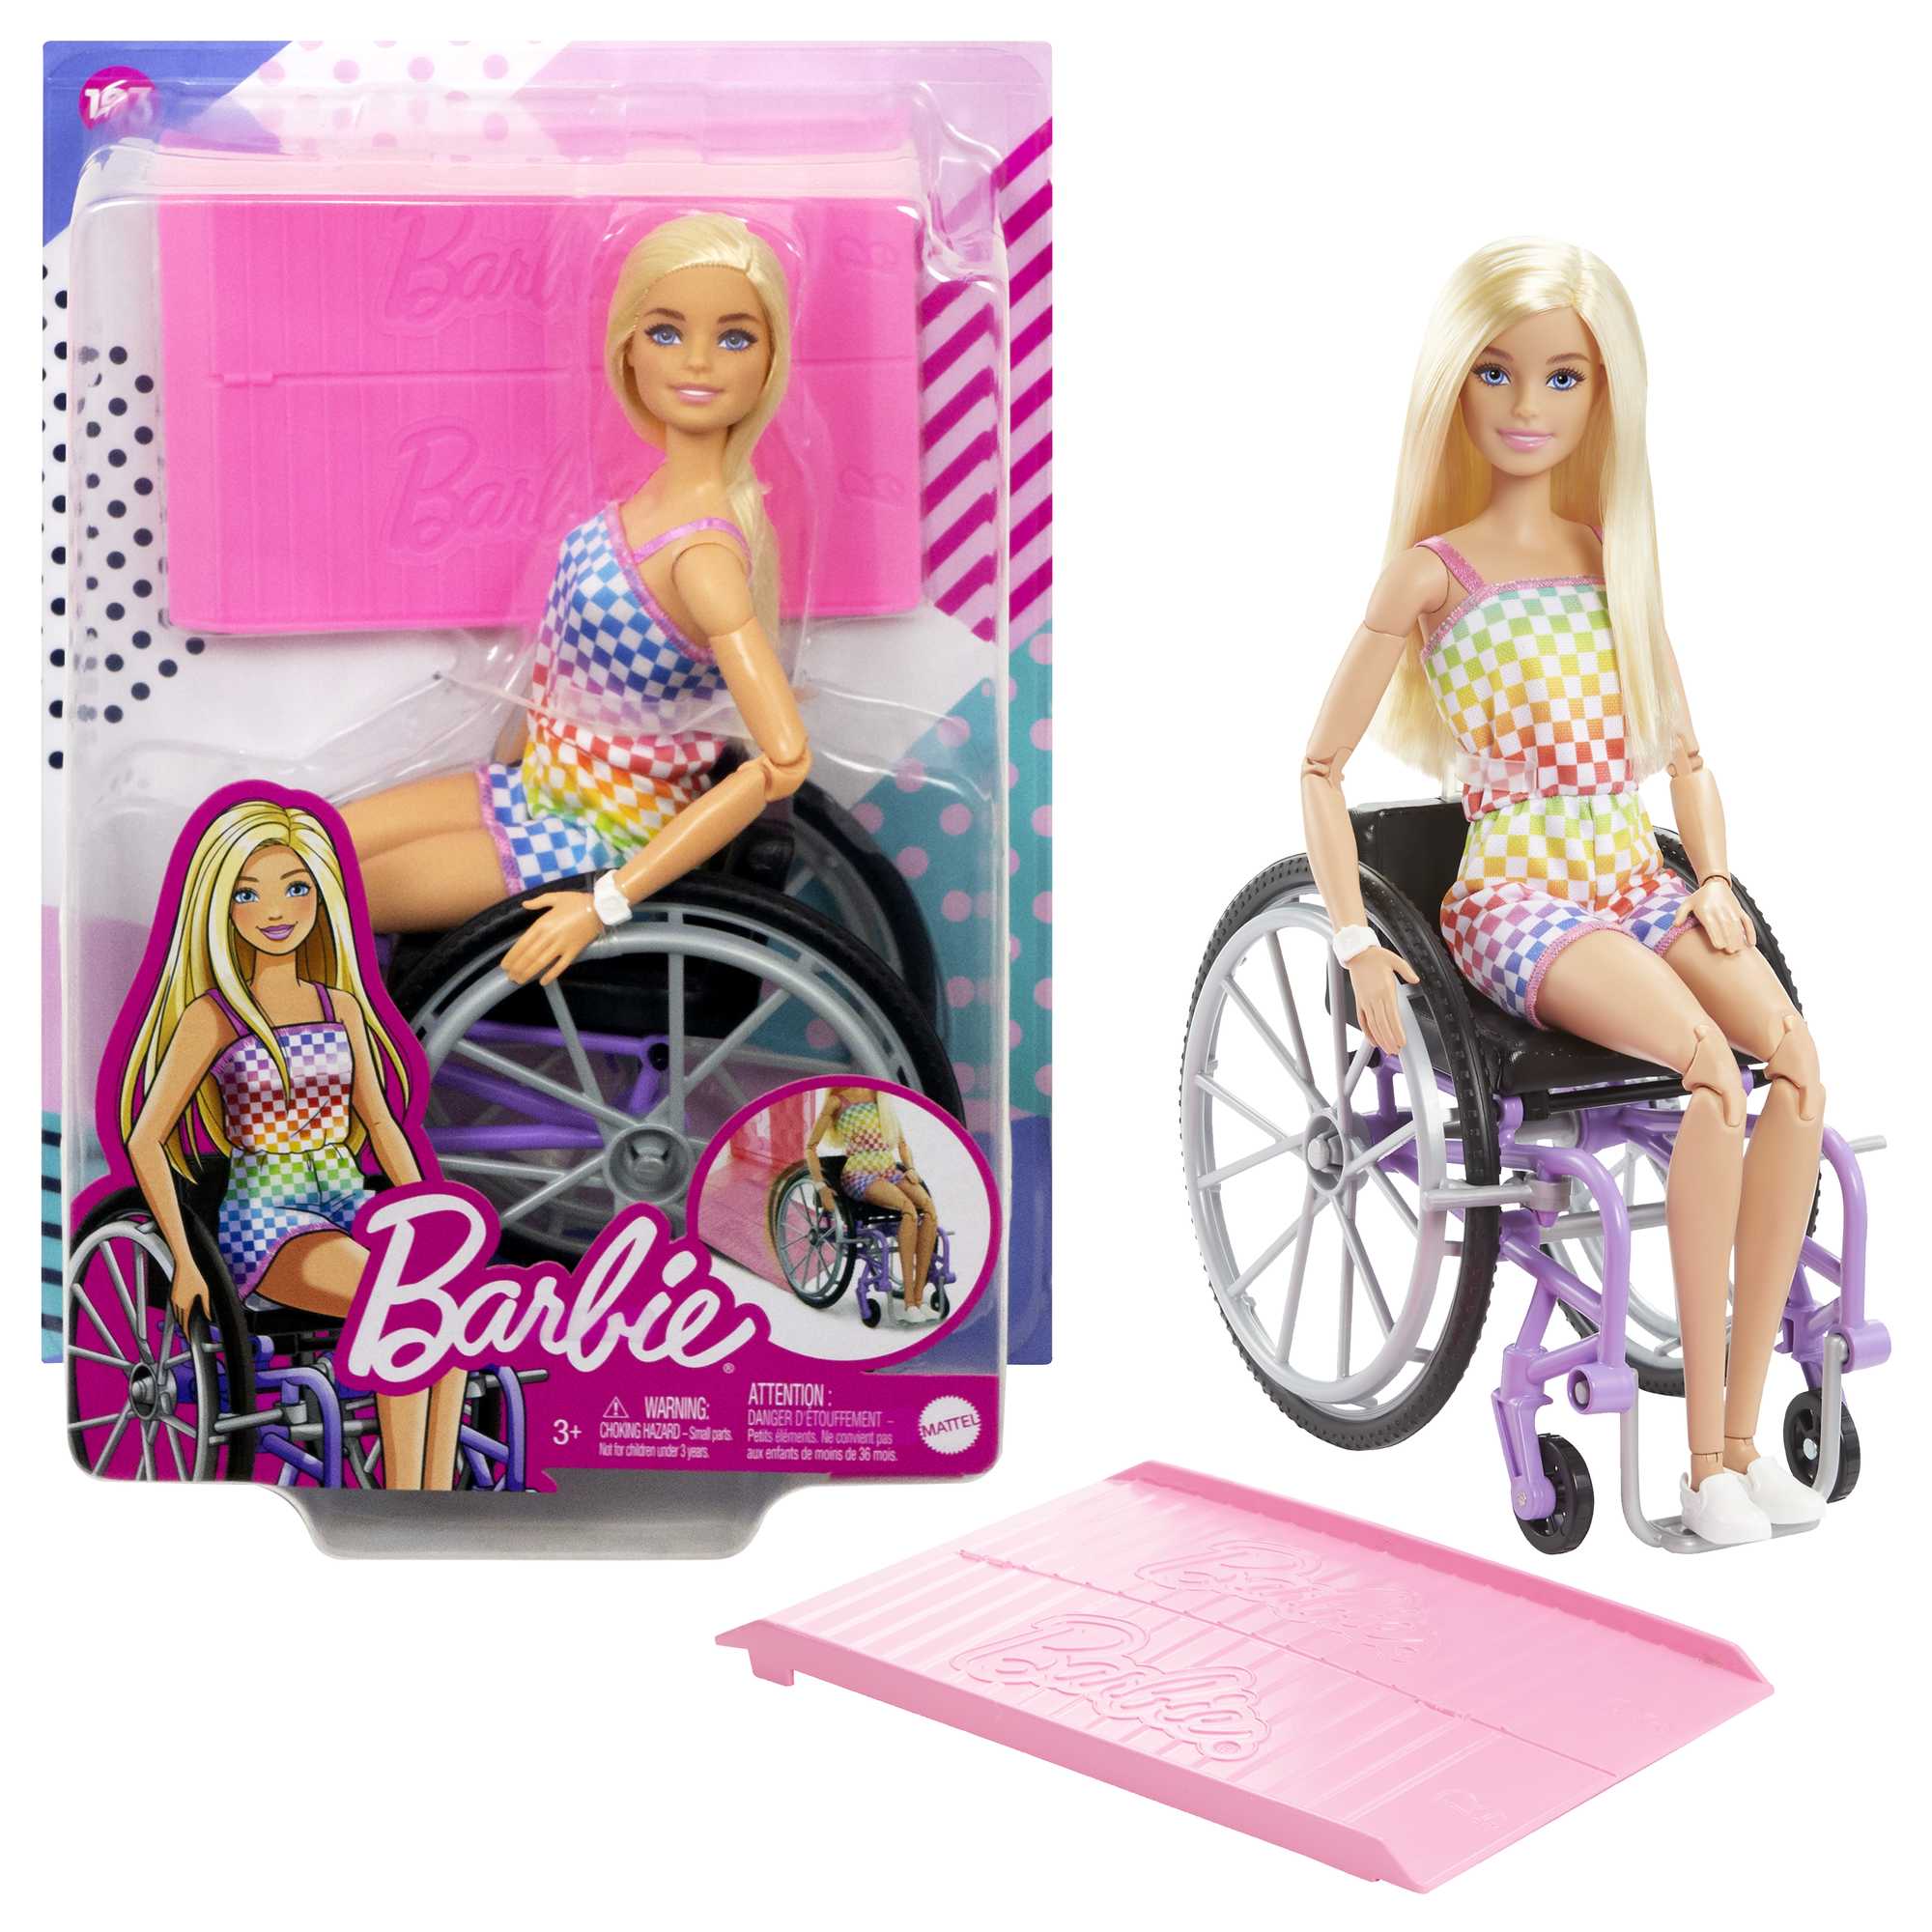  Barbie Ken Fashions 2-Pack Clothing Set, 1 Outfit & Accessory  for Barbie Doll: Tropical Dress & Tote; 1 Outfit & Accessory for Ken Doll:  Jersey & Board Shorts, Gift for Kids